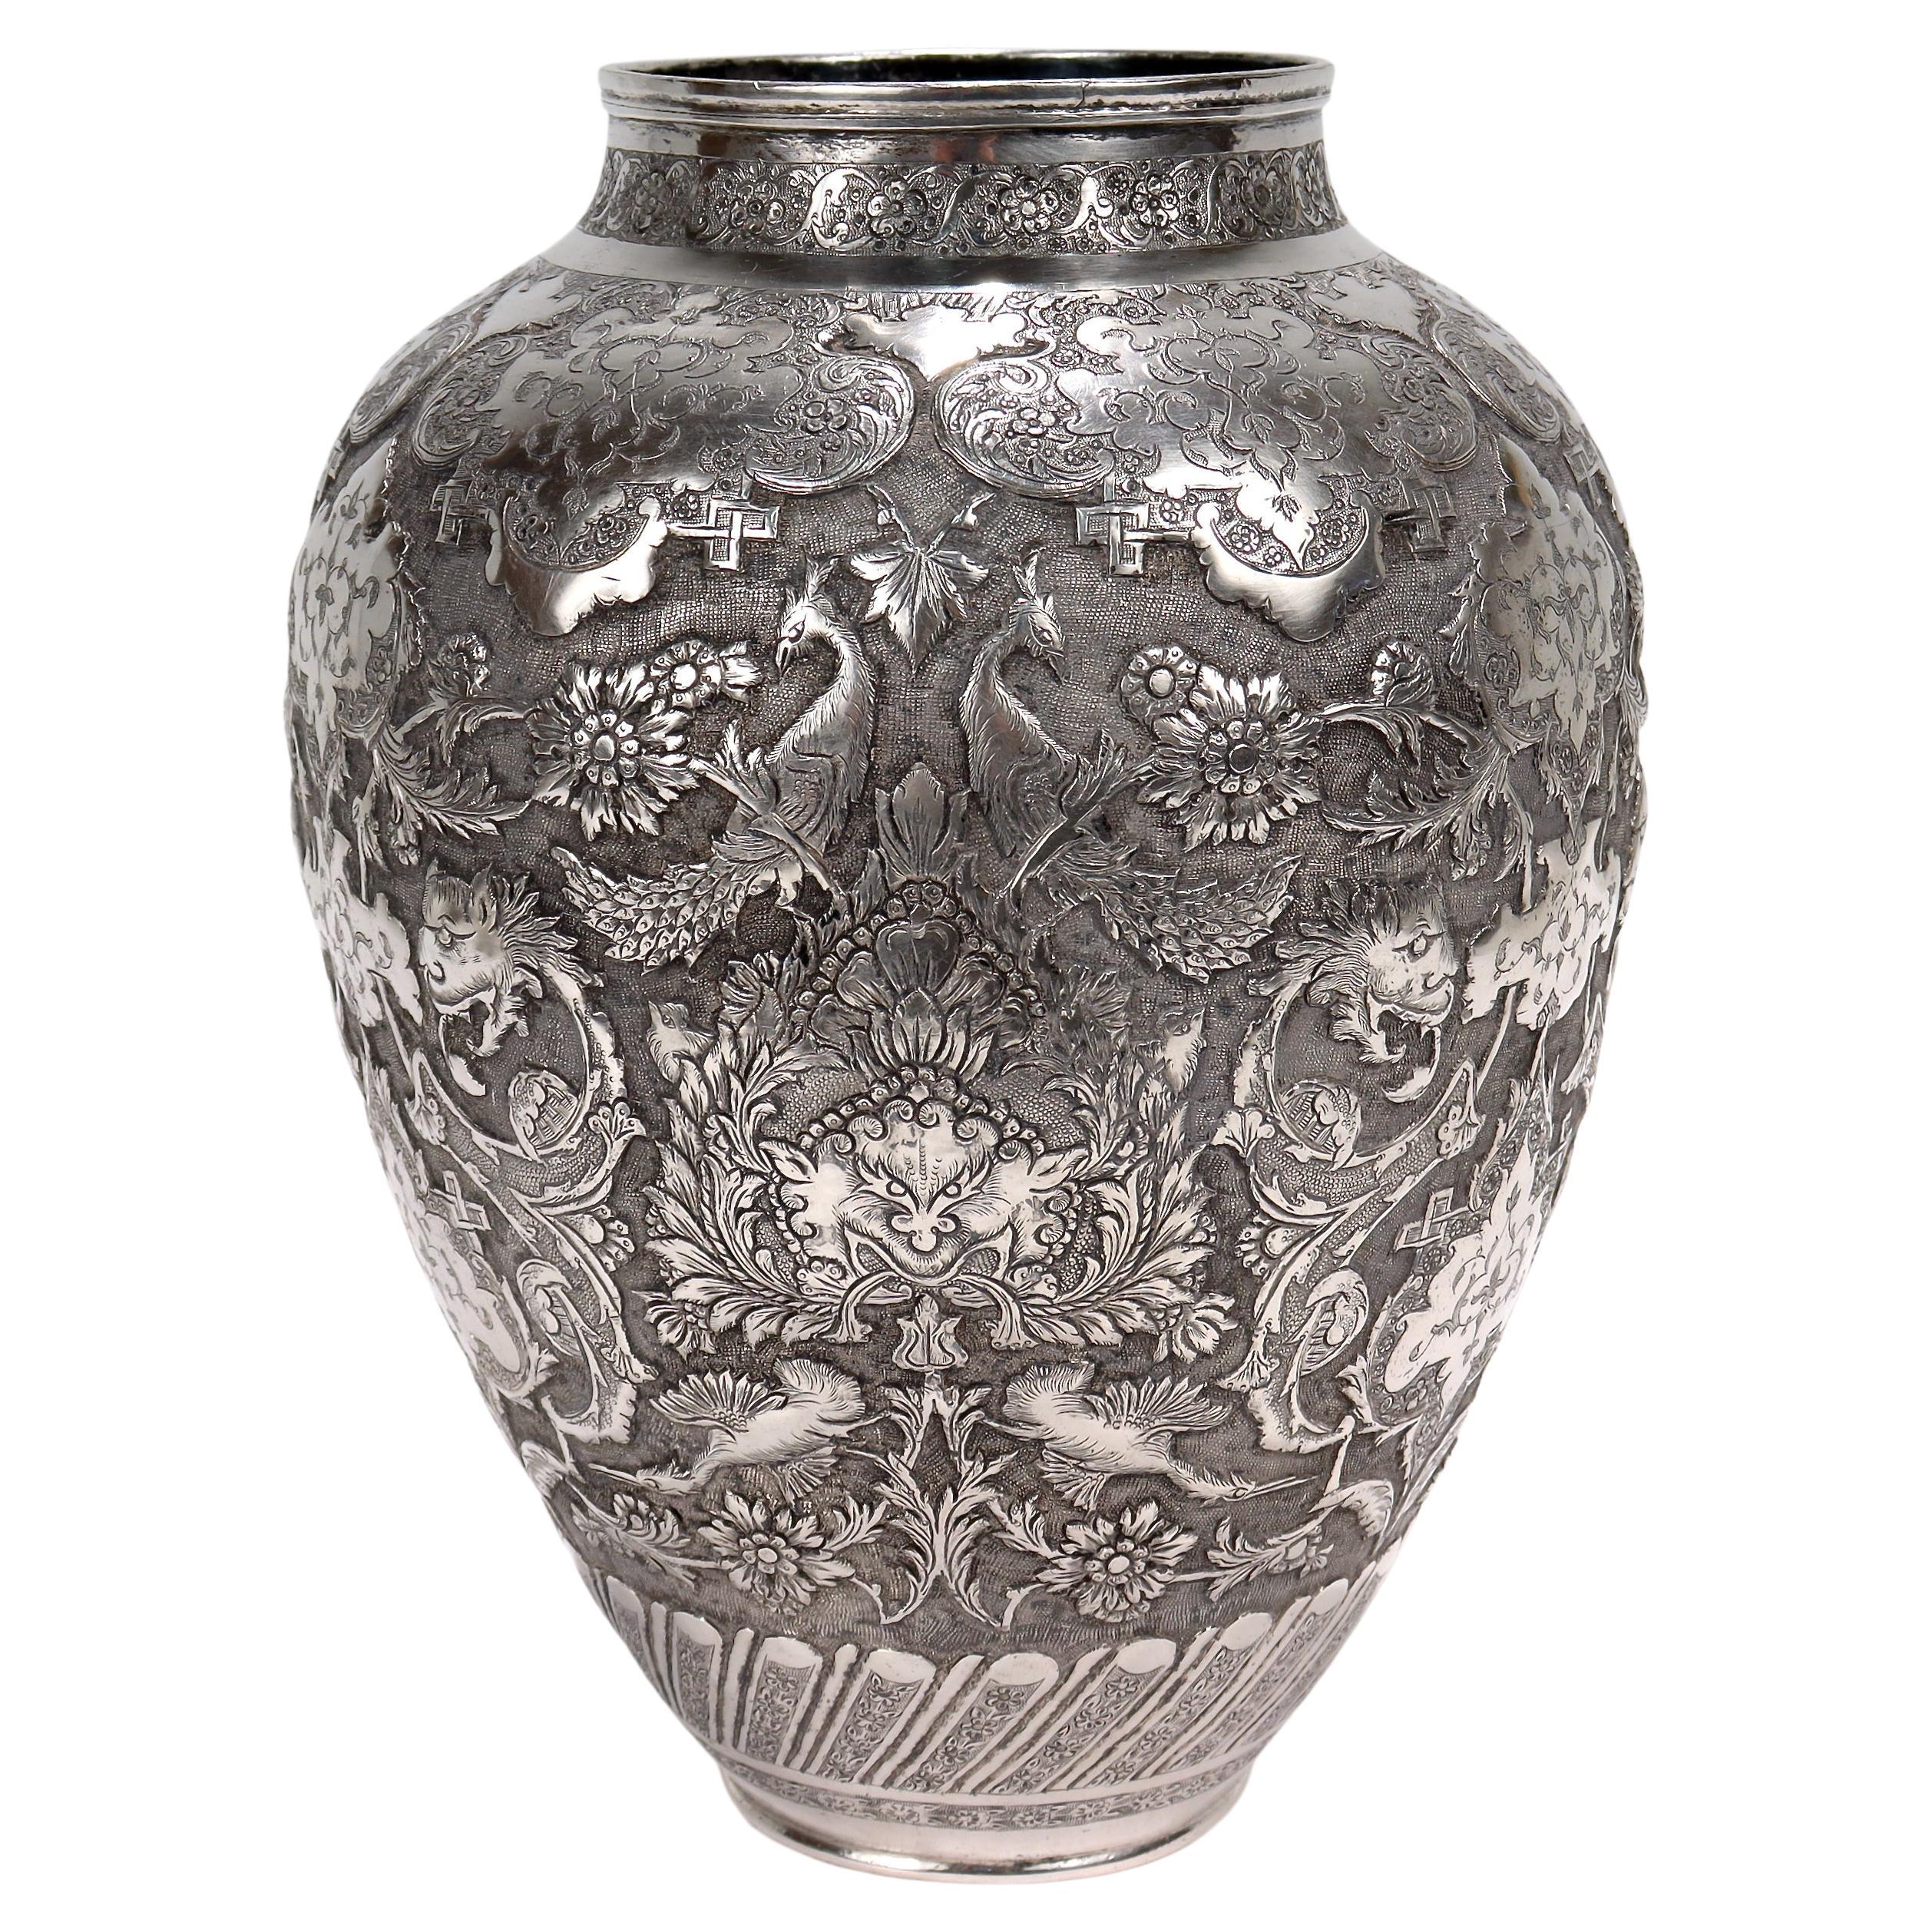 Old or Antique Signed Islamic Ottoman or Persian Repousse Silver Vase